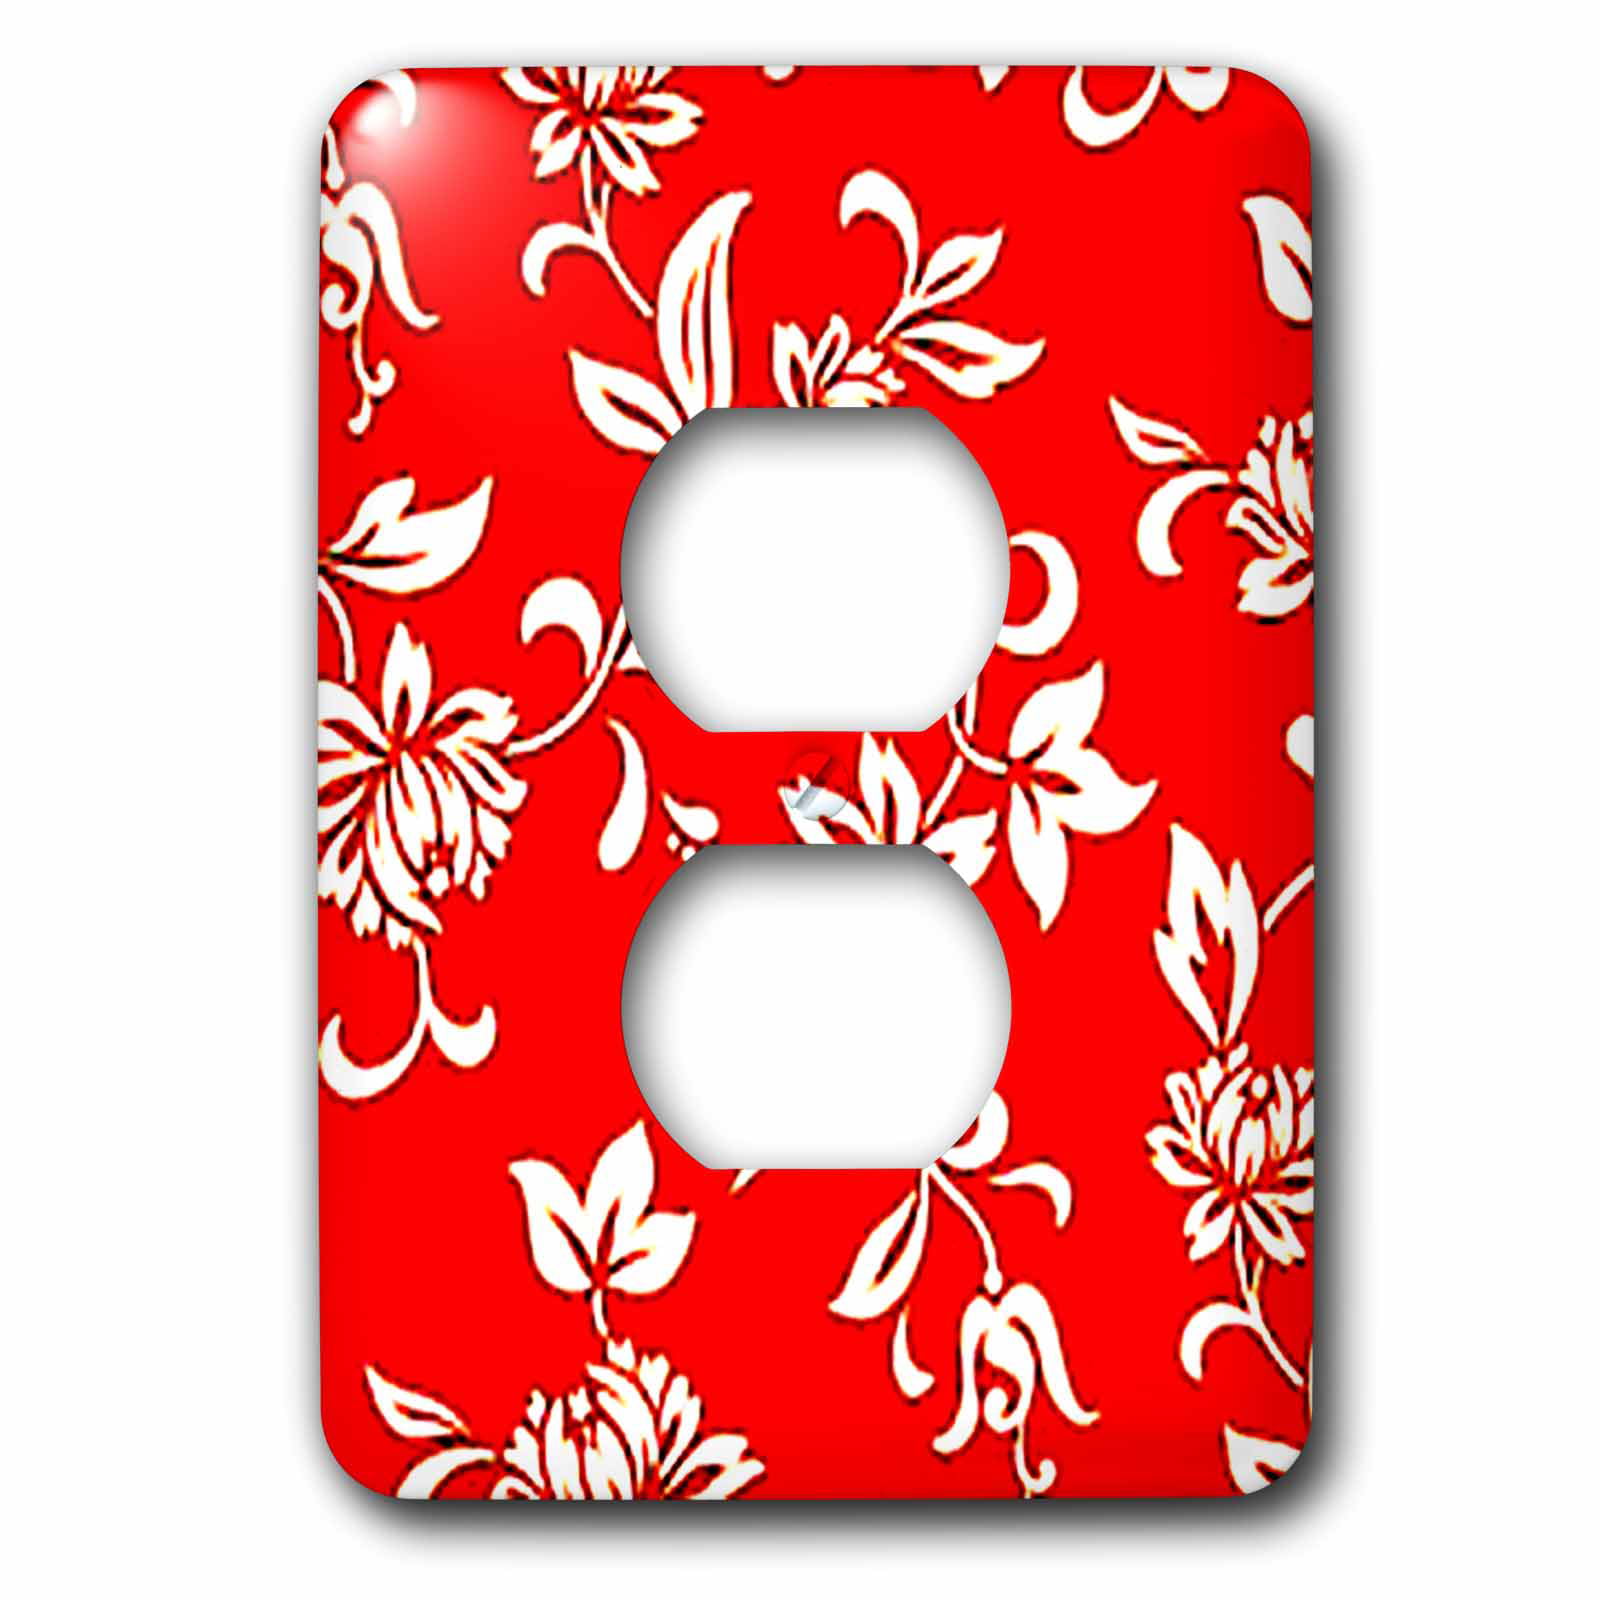 3dRose lsp_48649_6 Red Ladybugs Outlet Cover 